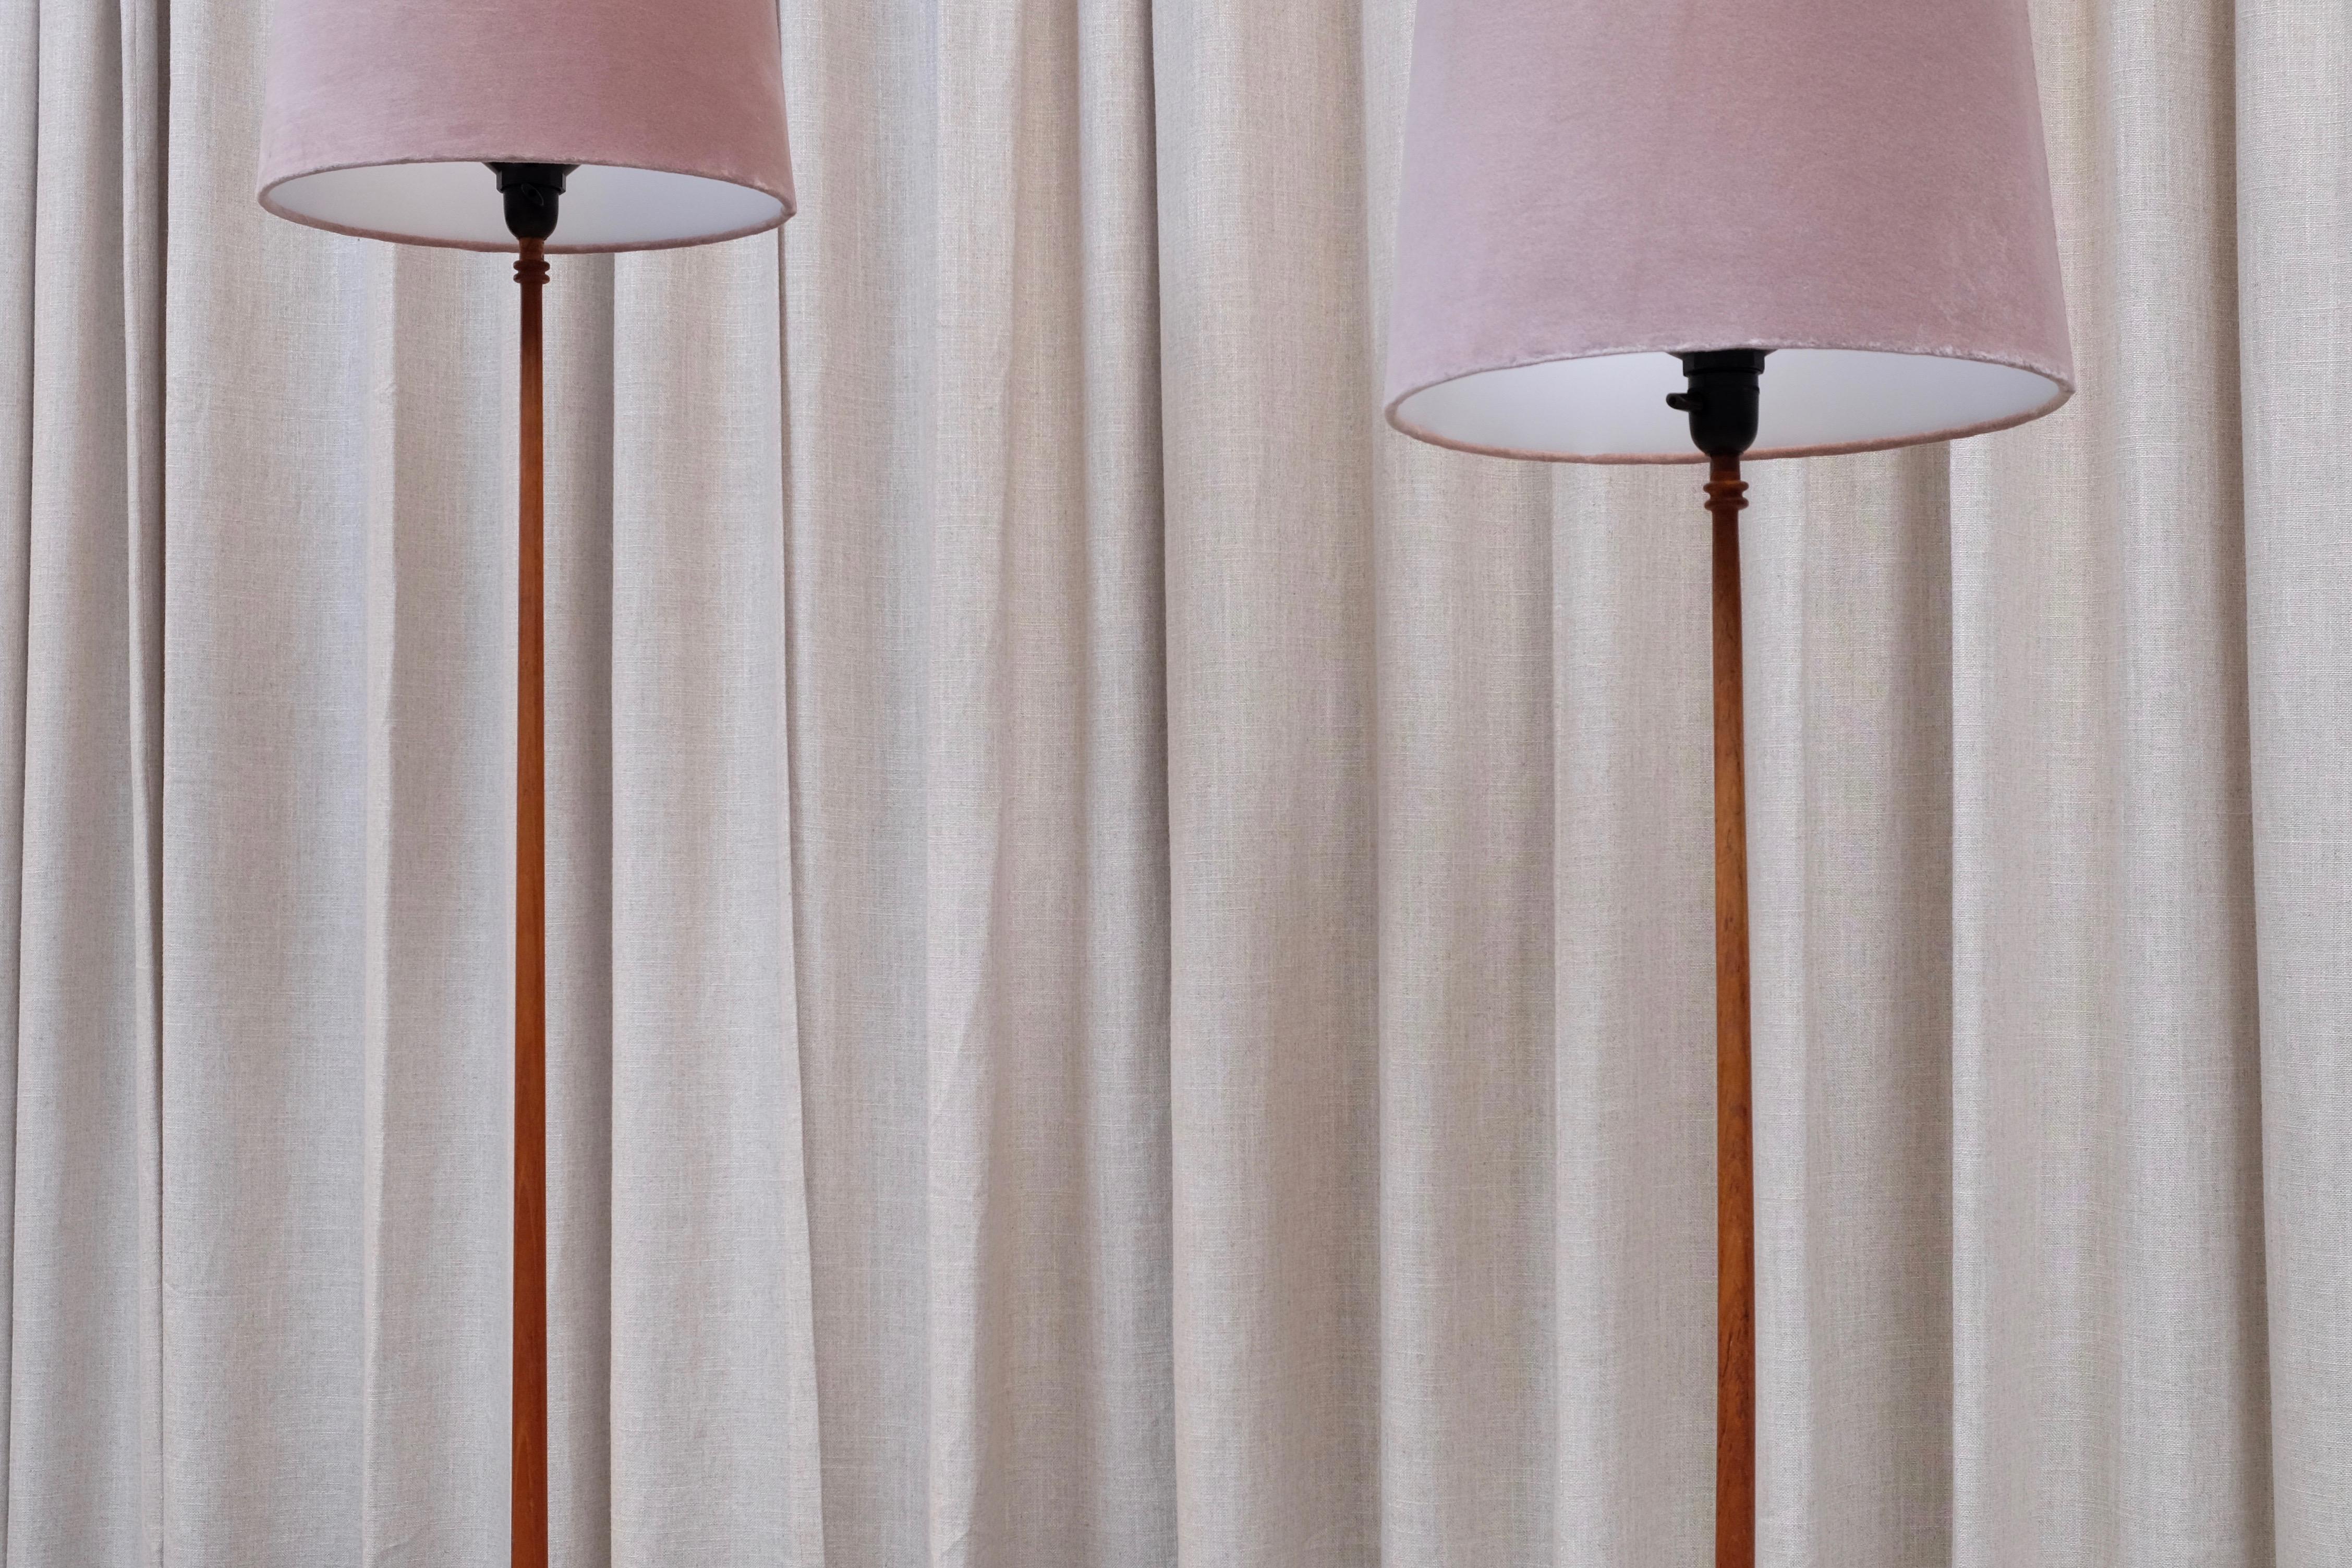 Rare Pair of Hans-Agne Jakobsson Floor Lamps Model G-45, 1960s In Good Condition For Sale In Stockholm, SE